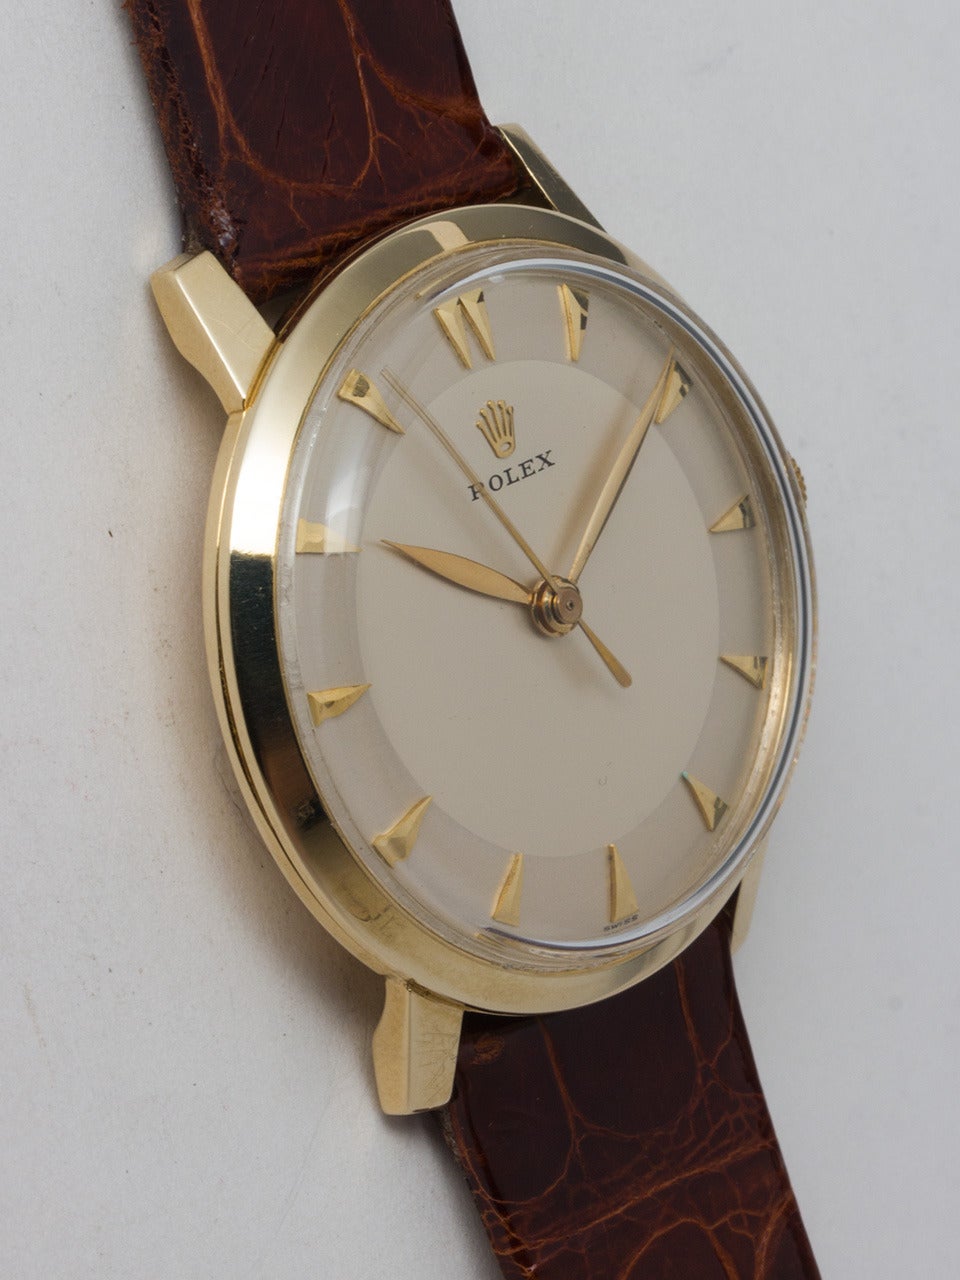 Rolex 14K Yellow Gold Dress Wristwatch, circa 1950s. 34mm case with smooth bezel and acrylic crystal. Lovely original two-tone silvered dial with applied gold arrow markers and hands. Powered by a manual-wind caliber 1215 movement. Offered on your